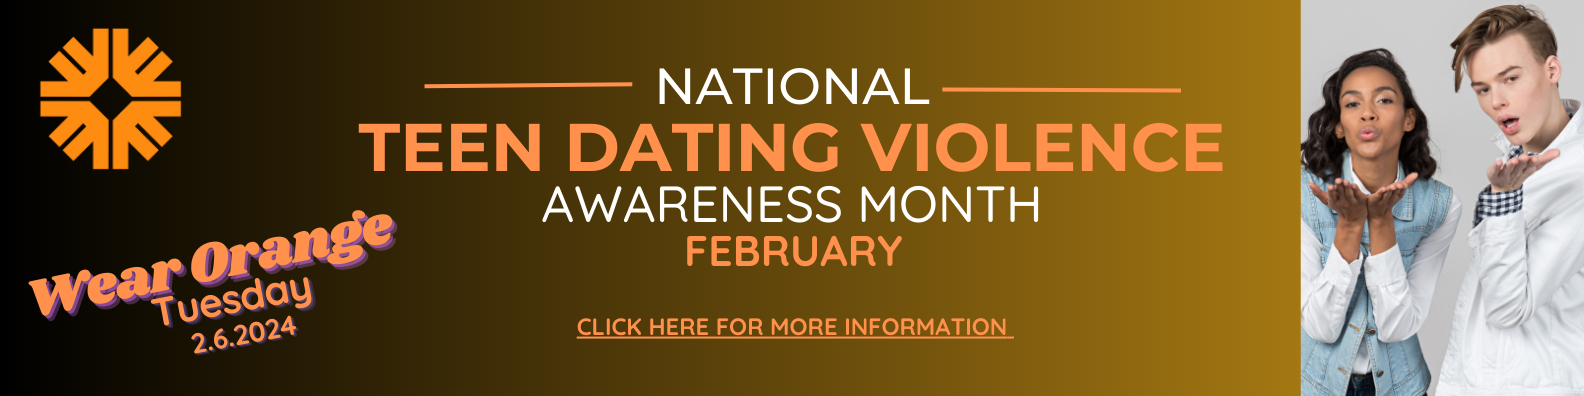 Teen Dating Violence Awareness (click for more information)